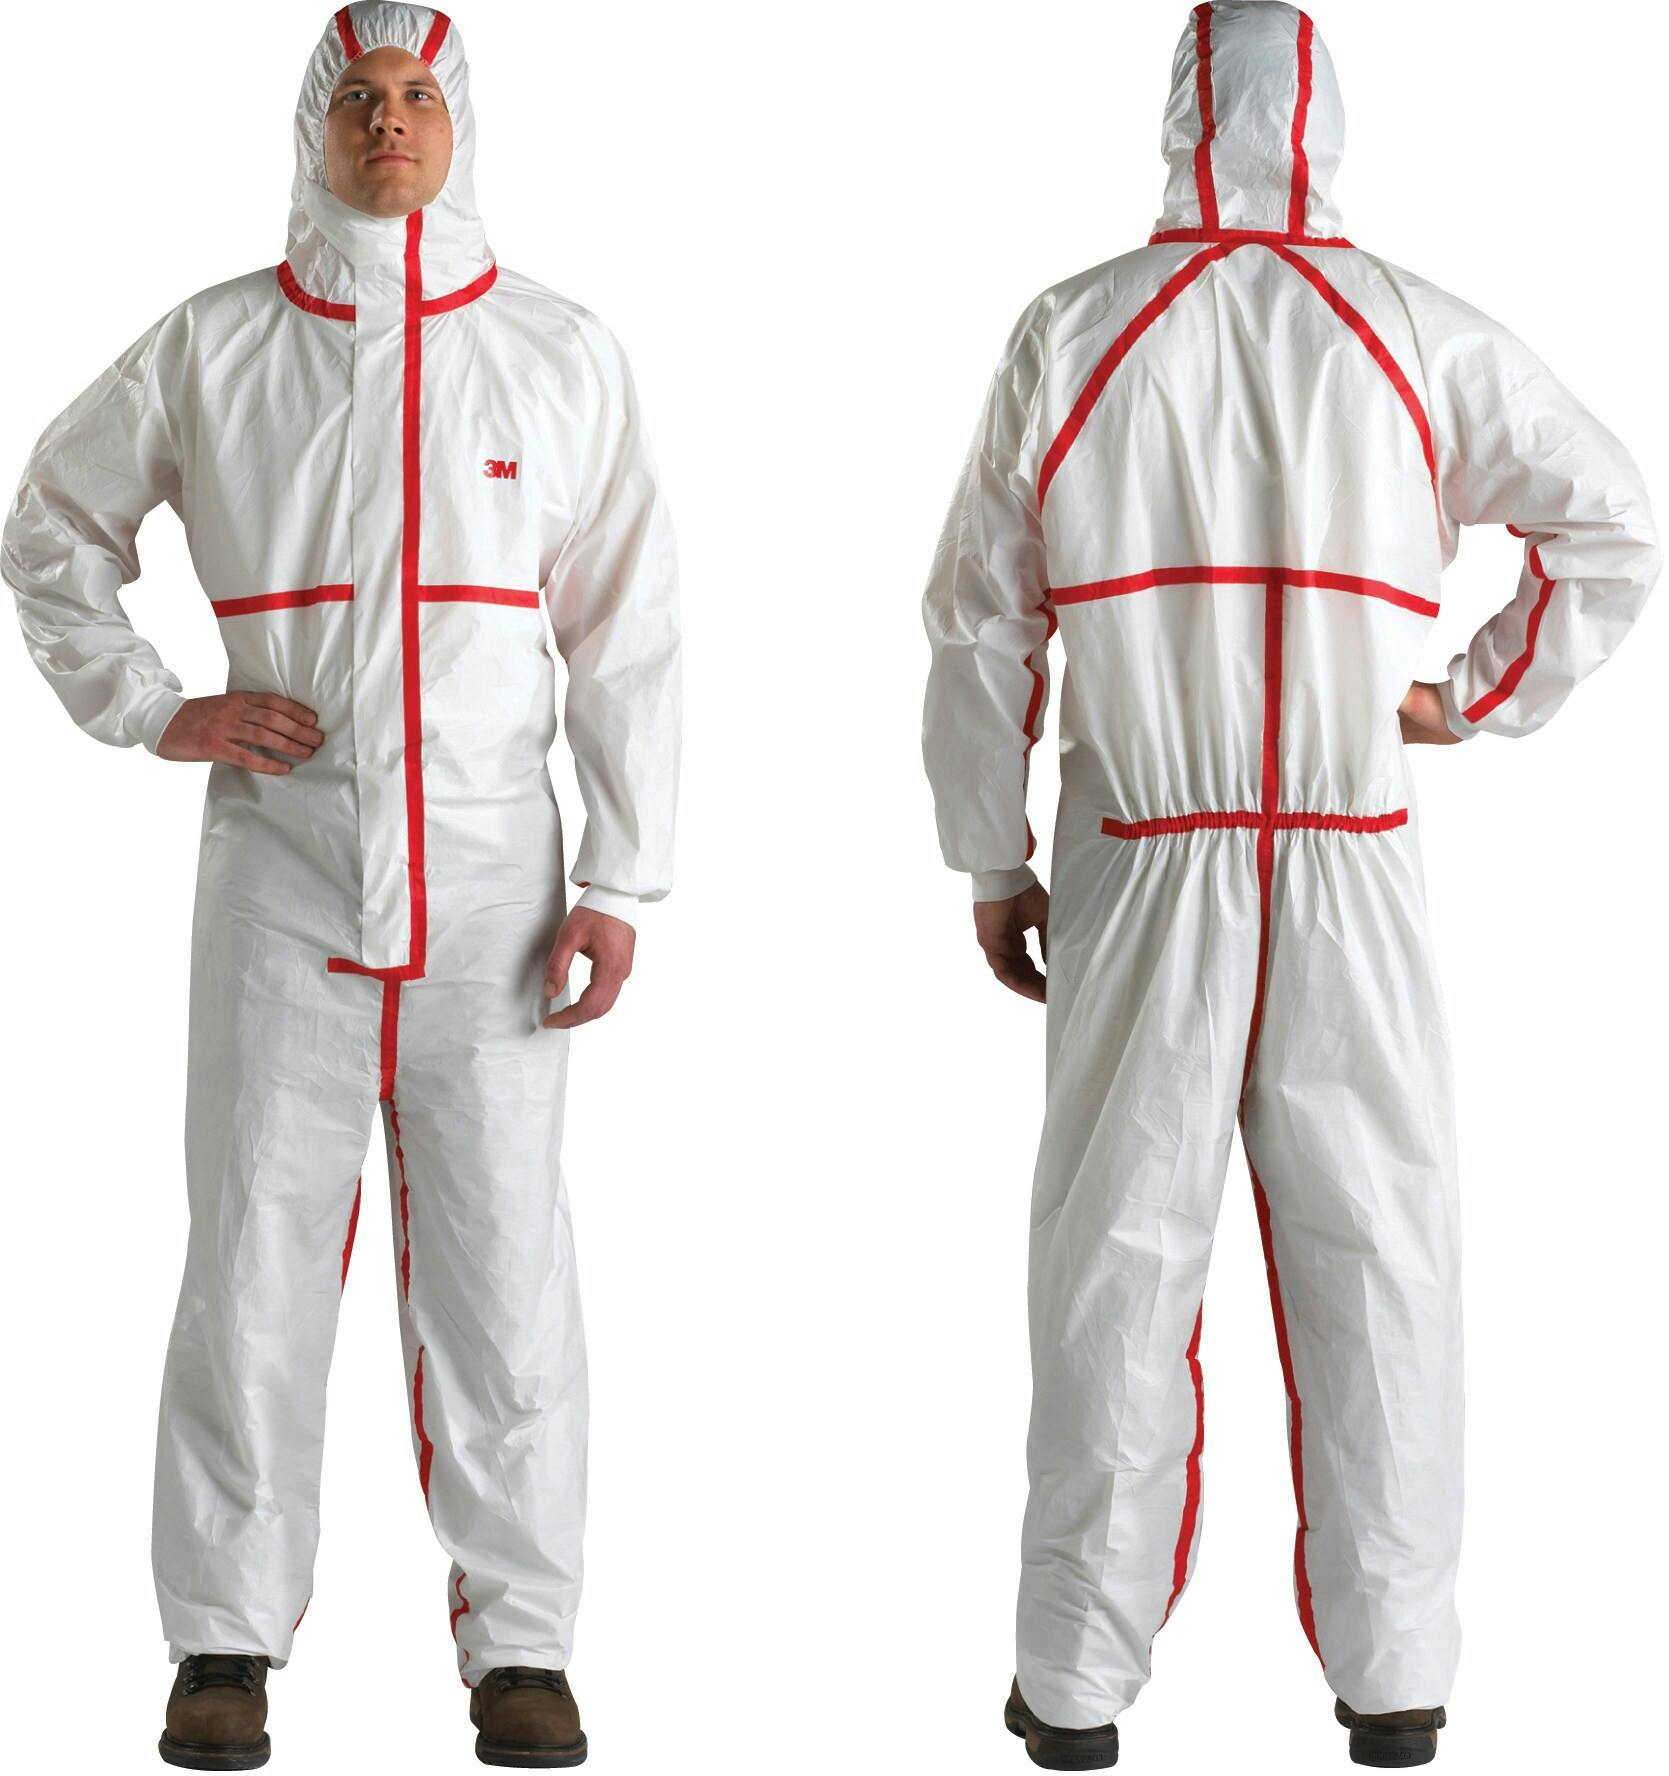 3M™ Protective Coverall 4565, White+Red, Extra Large, 20 ea/Case